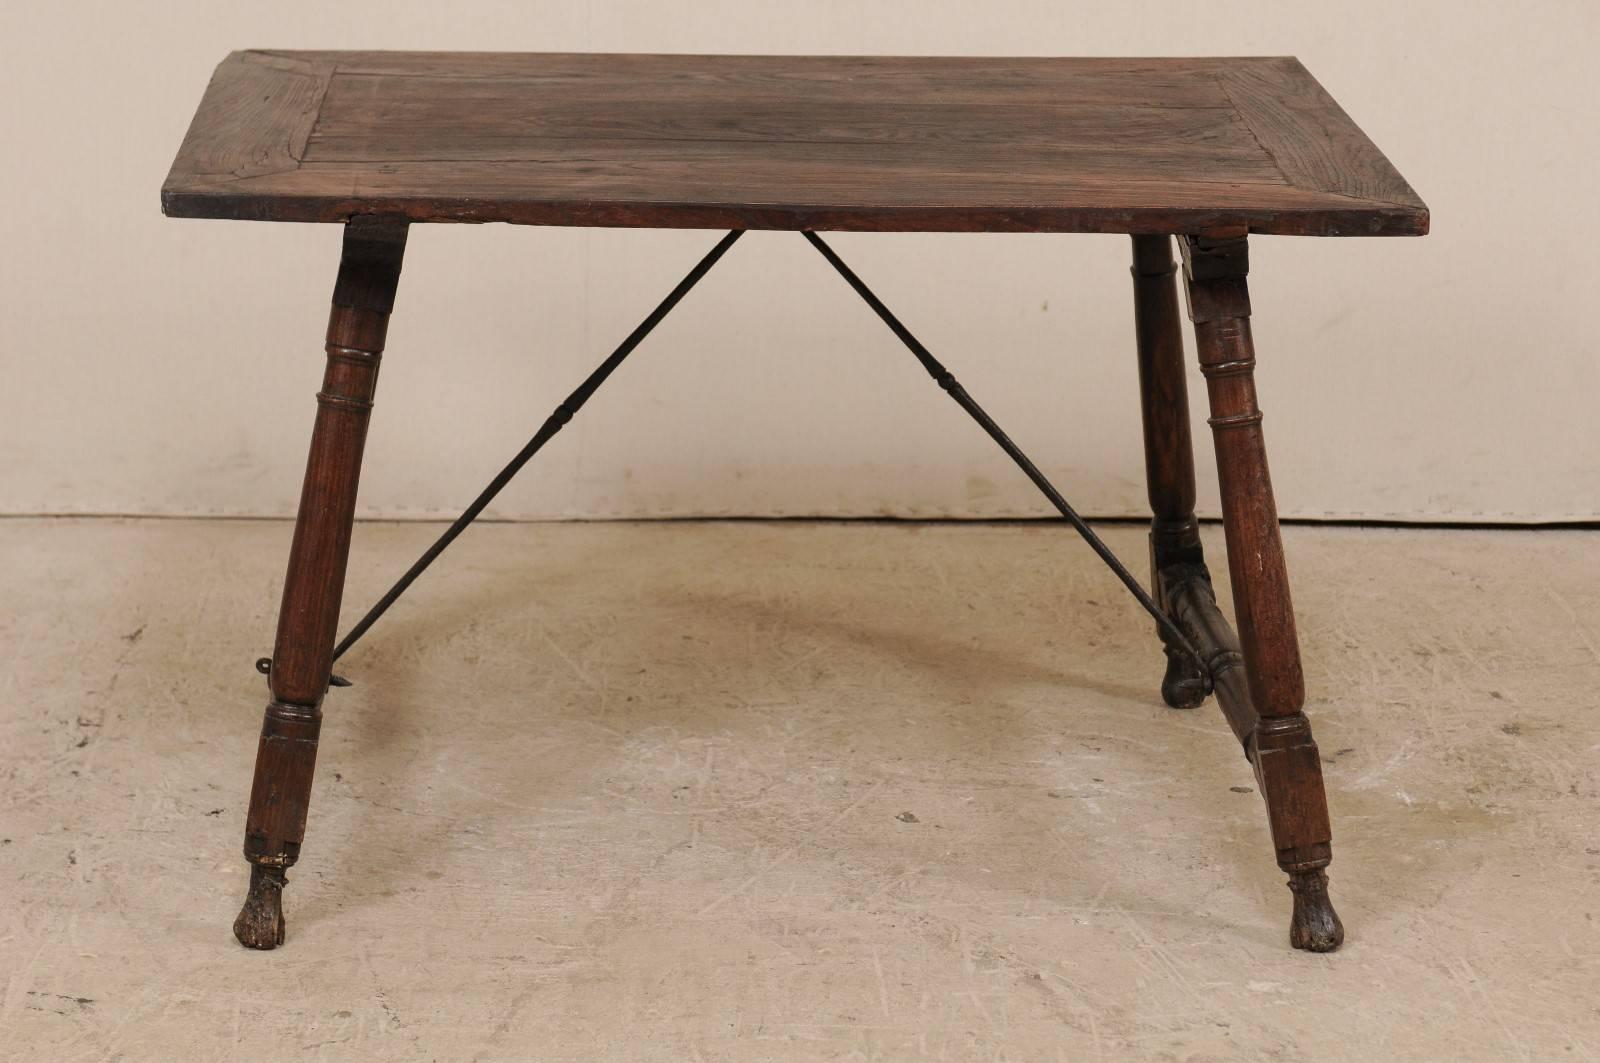 Antique Italian Wood & Iron Stretchered Table (or Great Desk!) Late 18th Century 3